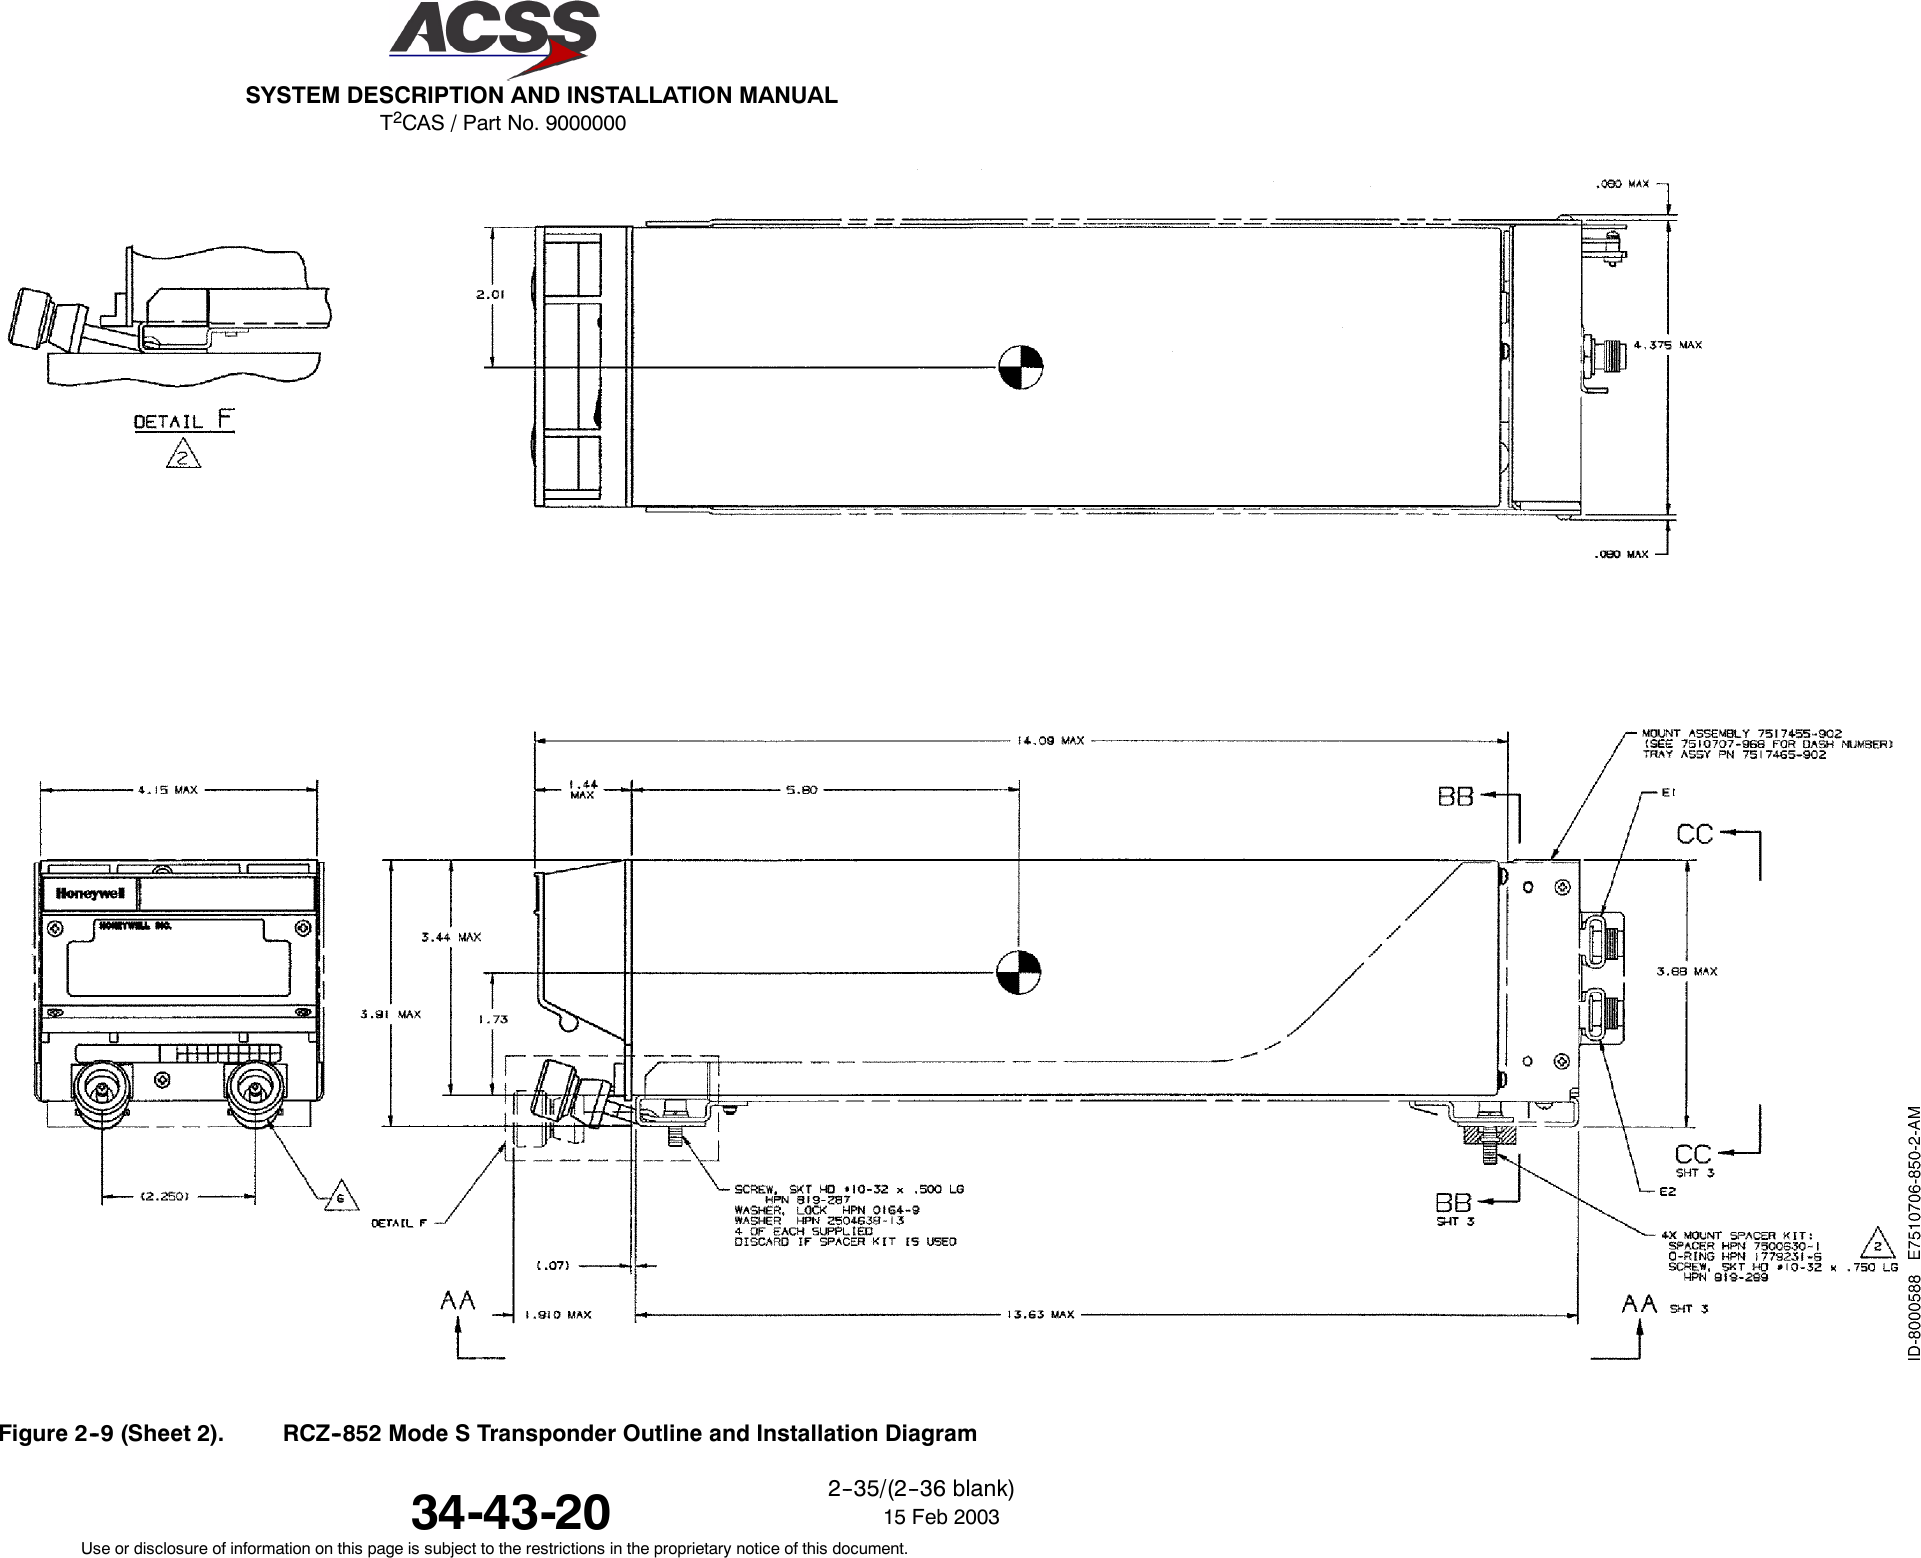 T2CAS / Part No. 9000000SYSTEM DESCRIPTION AND INSTALLATION MANUAL34-43-20 15 Feb 2003Use or disclosure of information on this page is subject to the restrictions in the proprietary notice of this document.2--35/(2--36 blank)Figure 2--9 (Sheet 2). RCZ--852 Mode S Transponder Outline and Installation Diagram